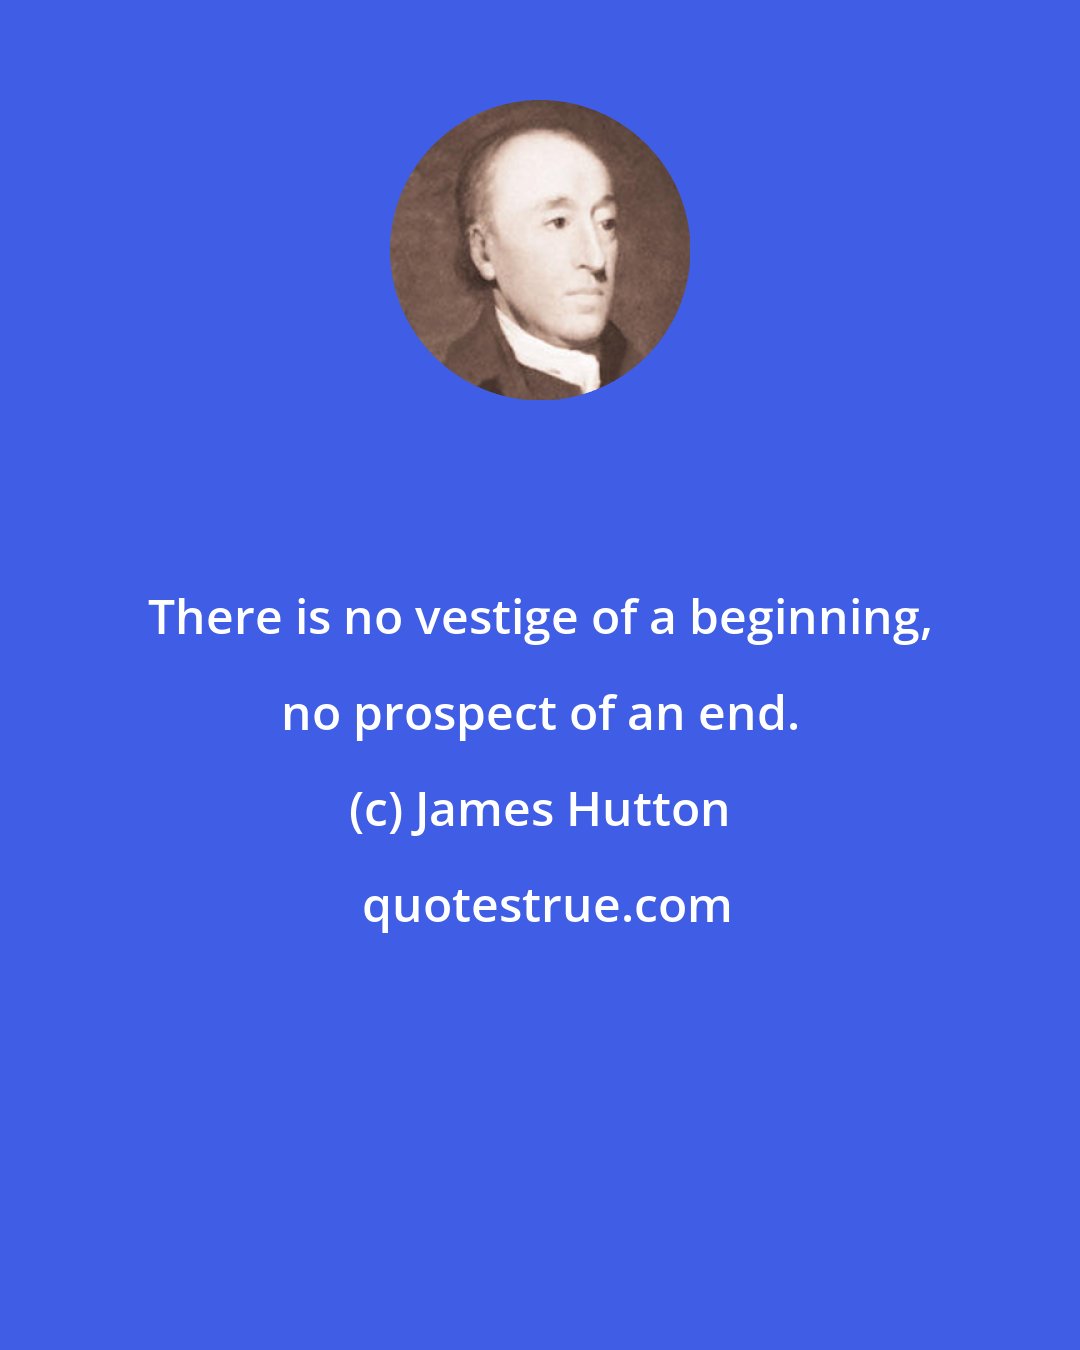 James Hutton: There is no vestige of a beginning, no prospect of an end.